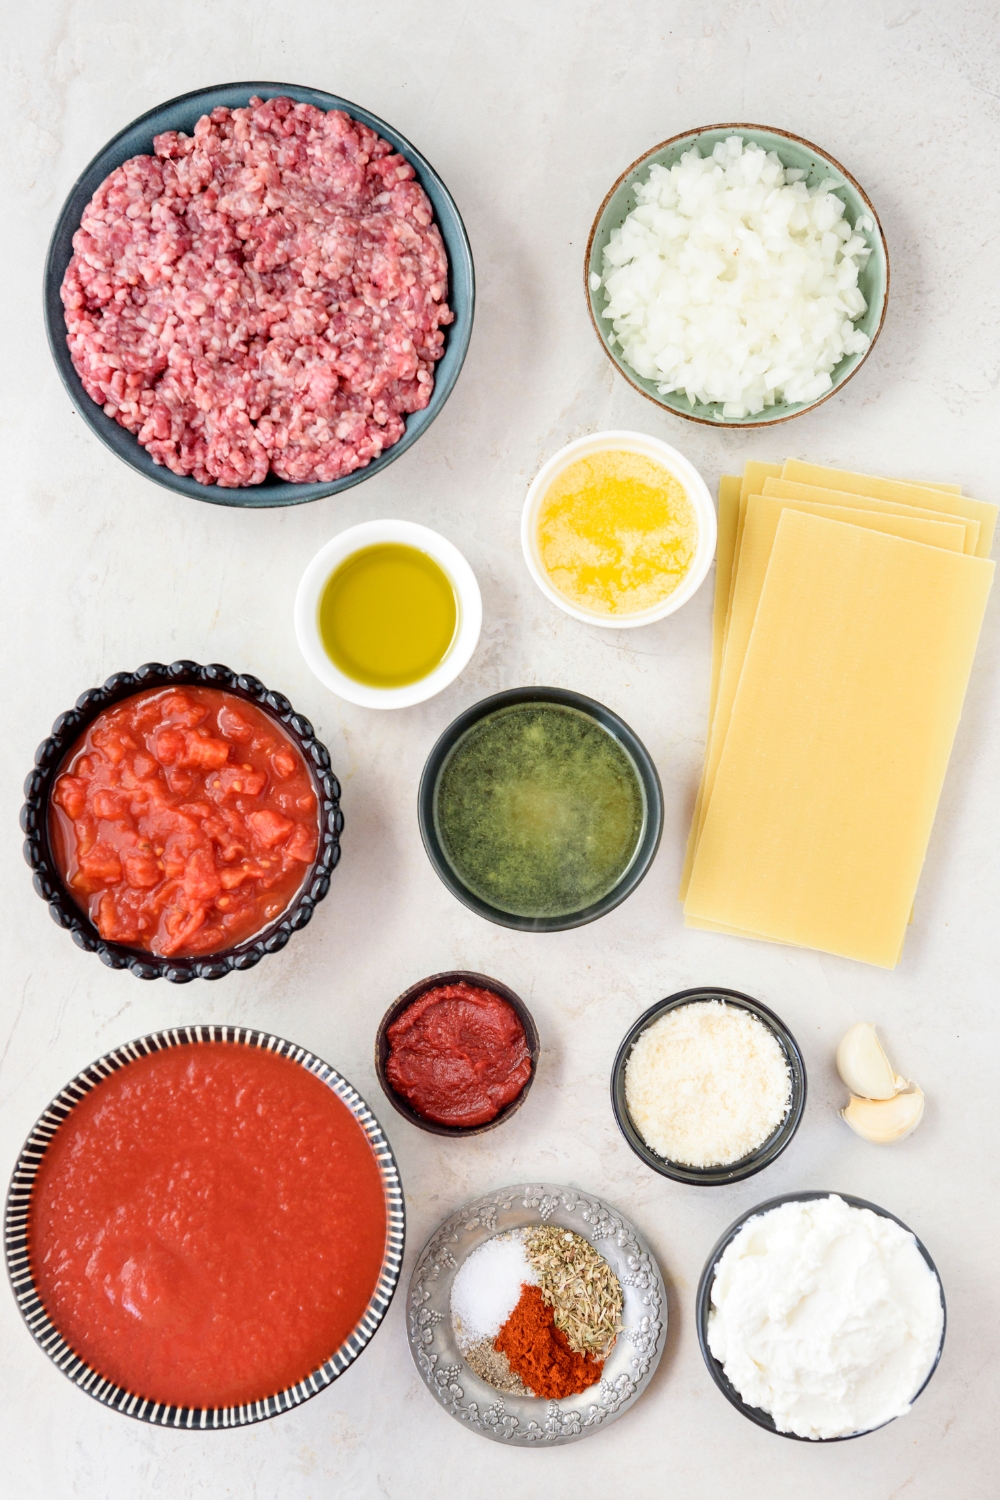 An assortment of ingredients including bowls of tomato sauce, crushed tomatoes, spices, raw ground beef, cheese, diced onion, oil, melted butter, broth, and a stack of lasagna pasta sheets.